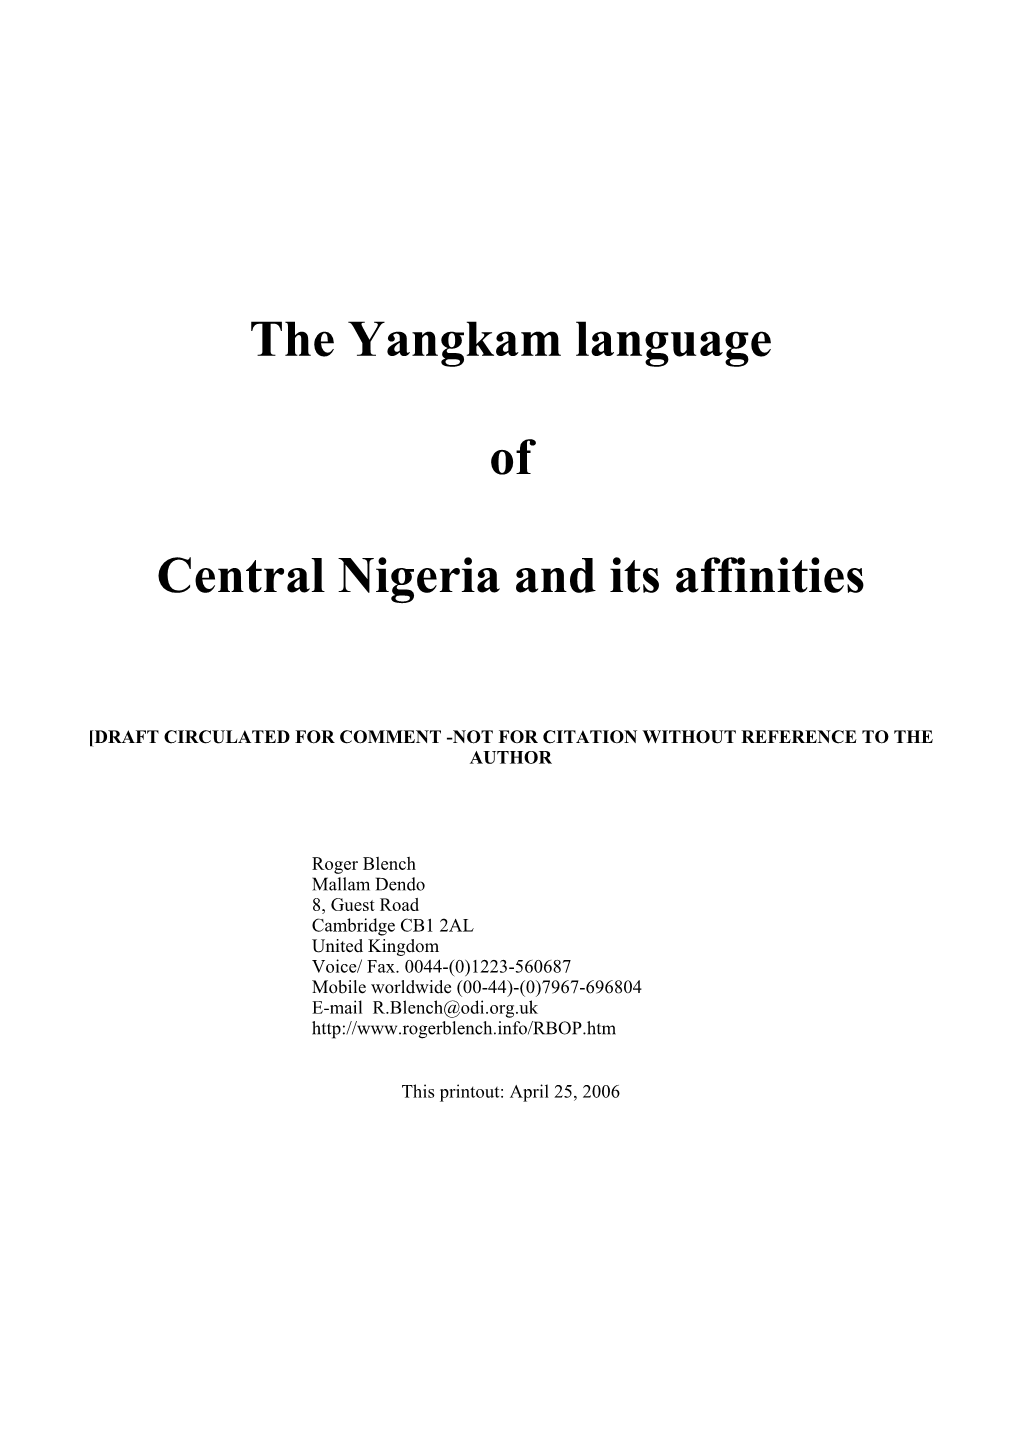 The Yangkam Language of Central Nigeria and Its Affinities